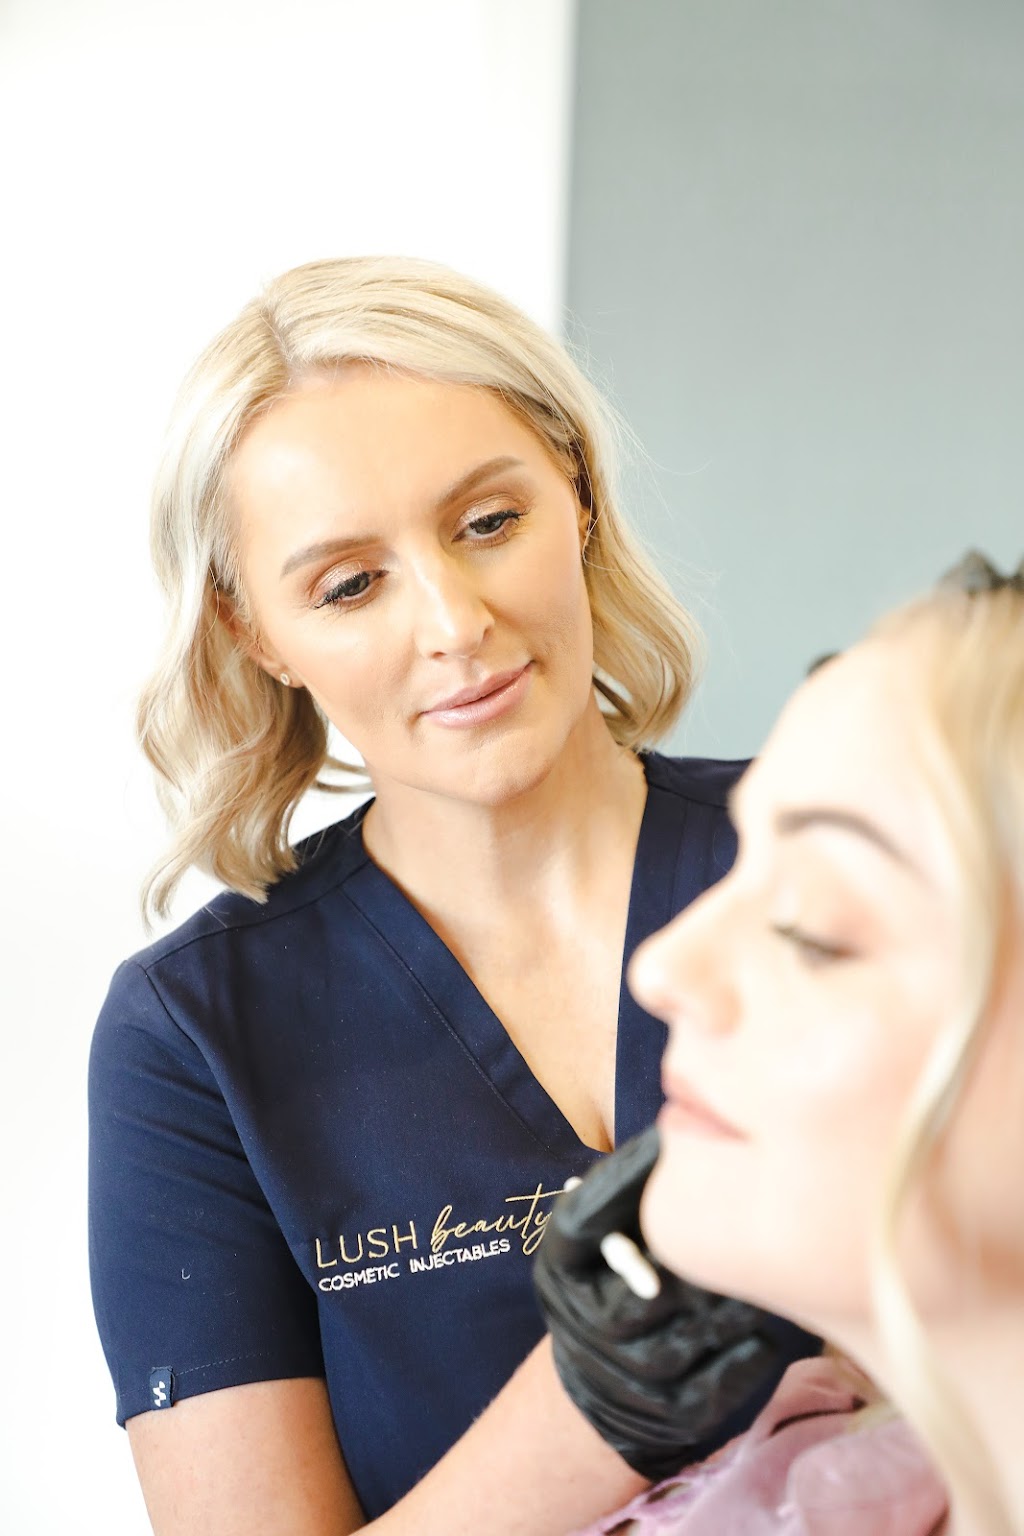 Lush Beauty Cosmetic Injectables | health | 174 Commercial Rd, Koroit VIC 3282, Australia | 0439811346 OR +61 439 811 346